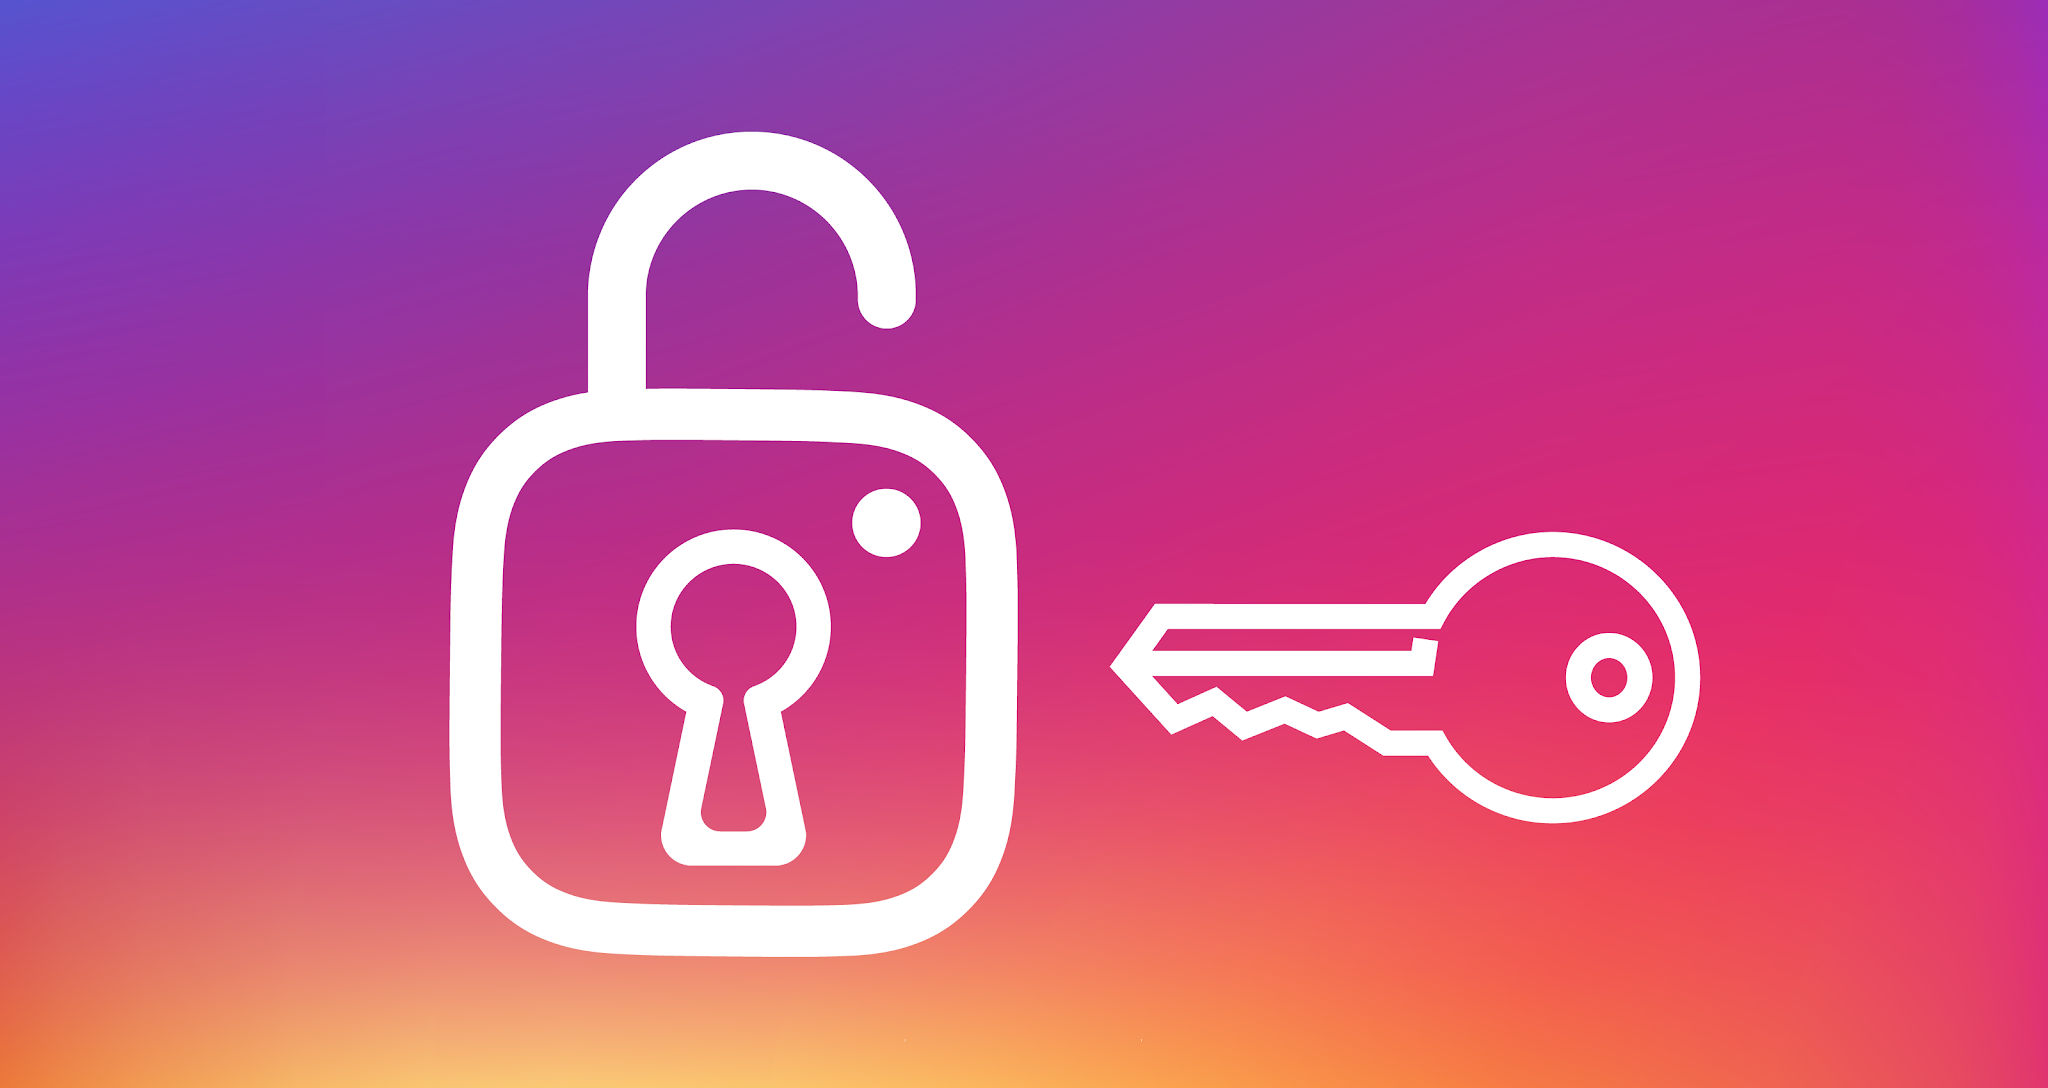 5 Easy Ways to Collect Email Addresses on Instagram